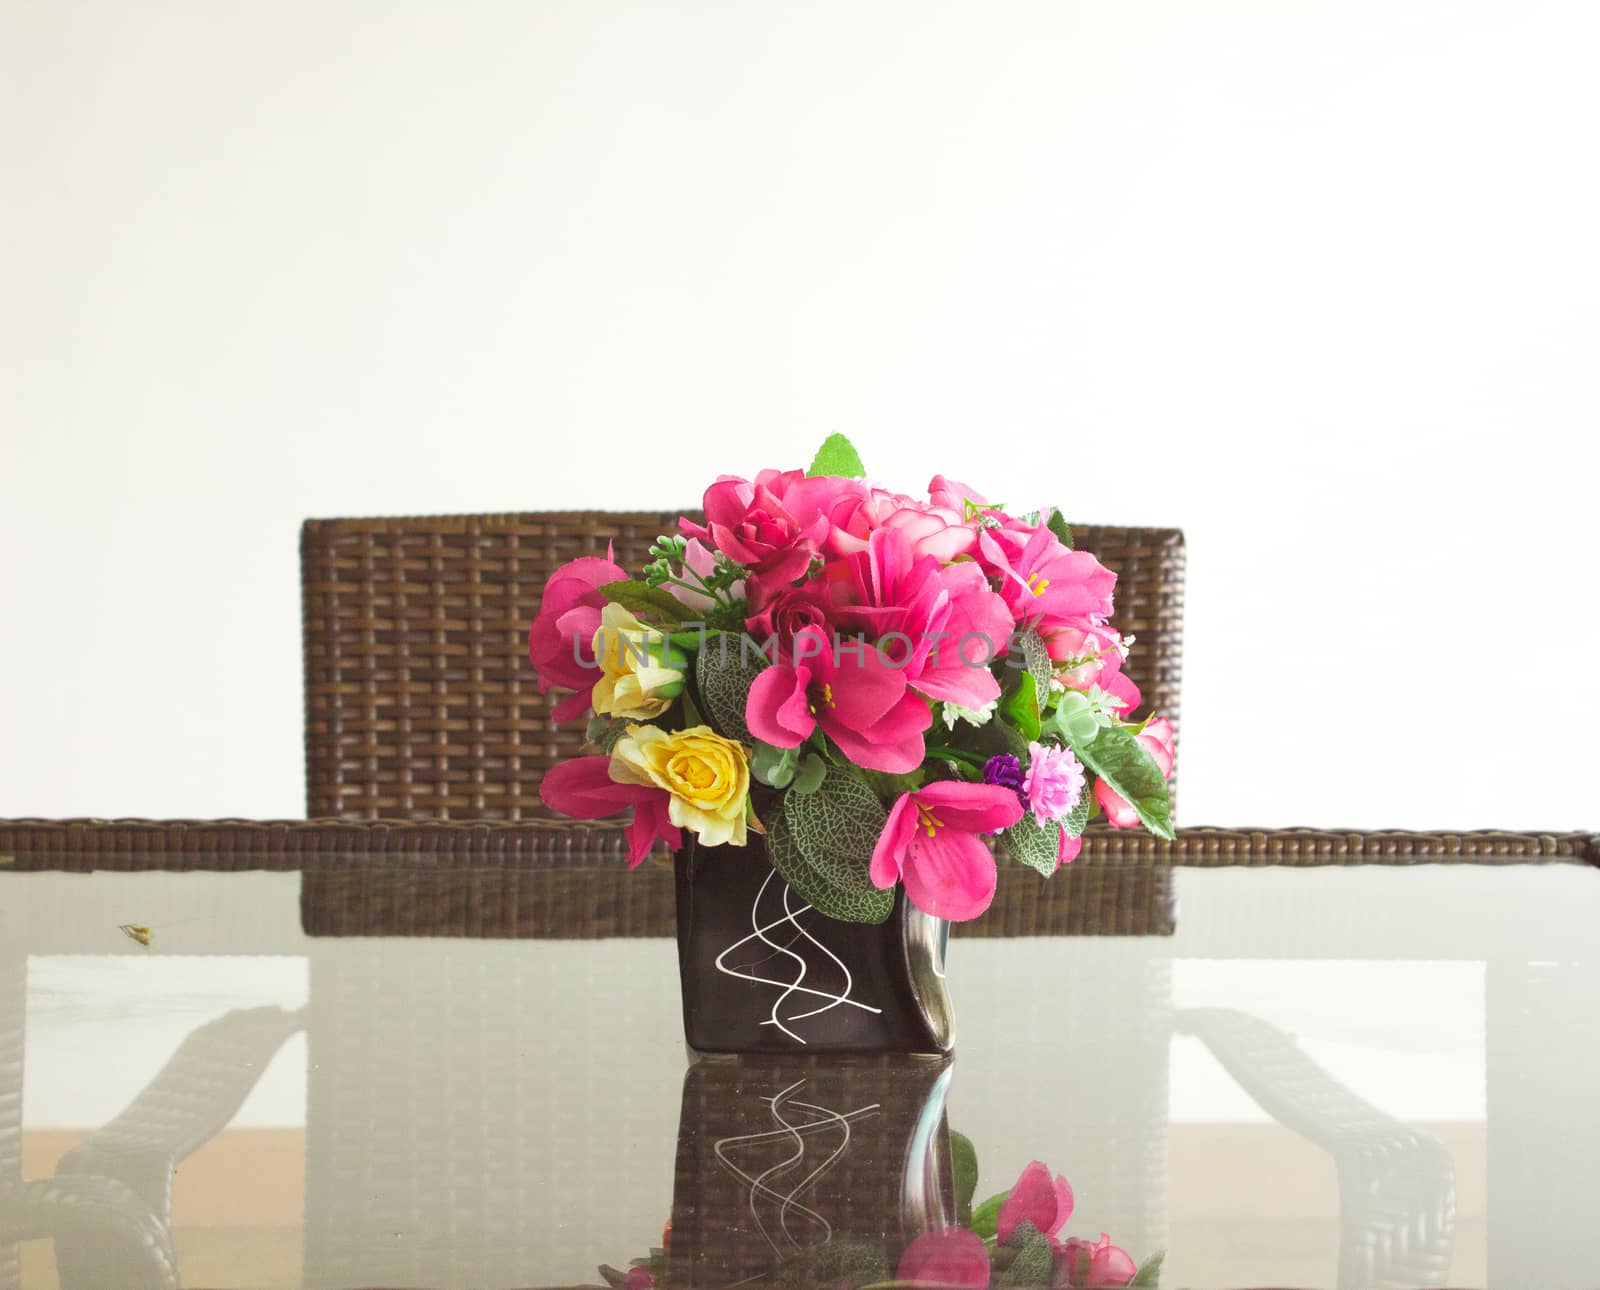 Vase of flowers on the glass table